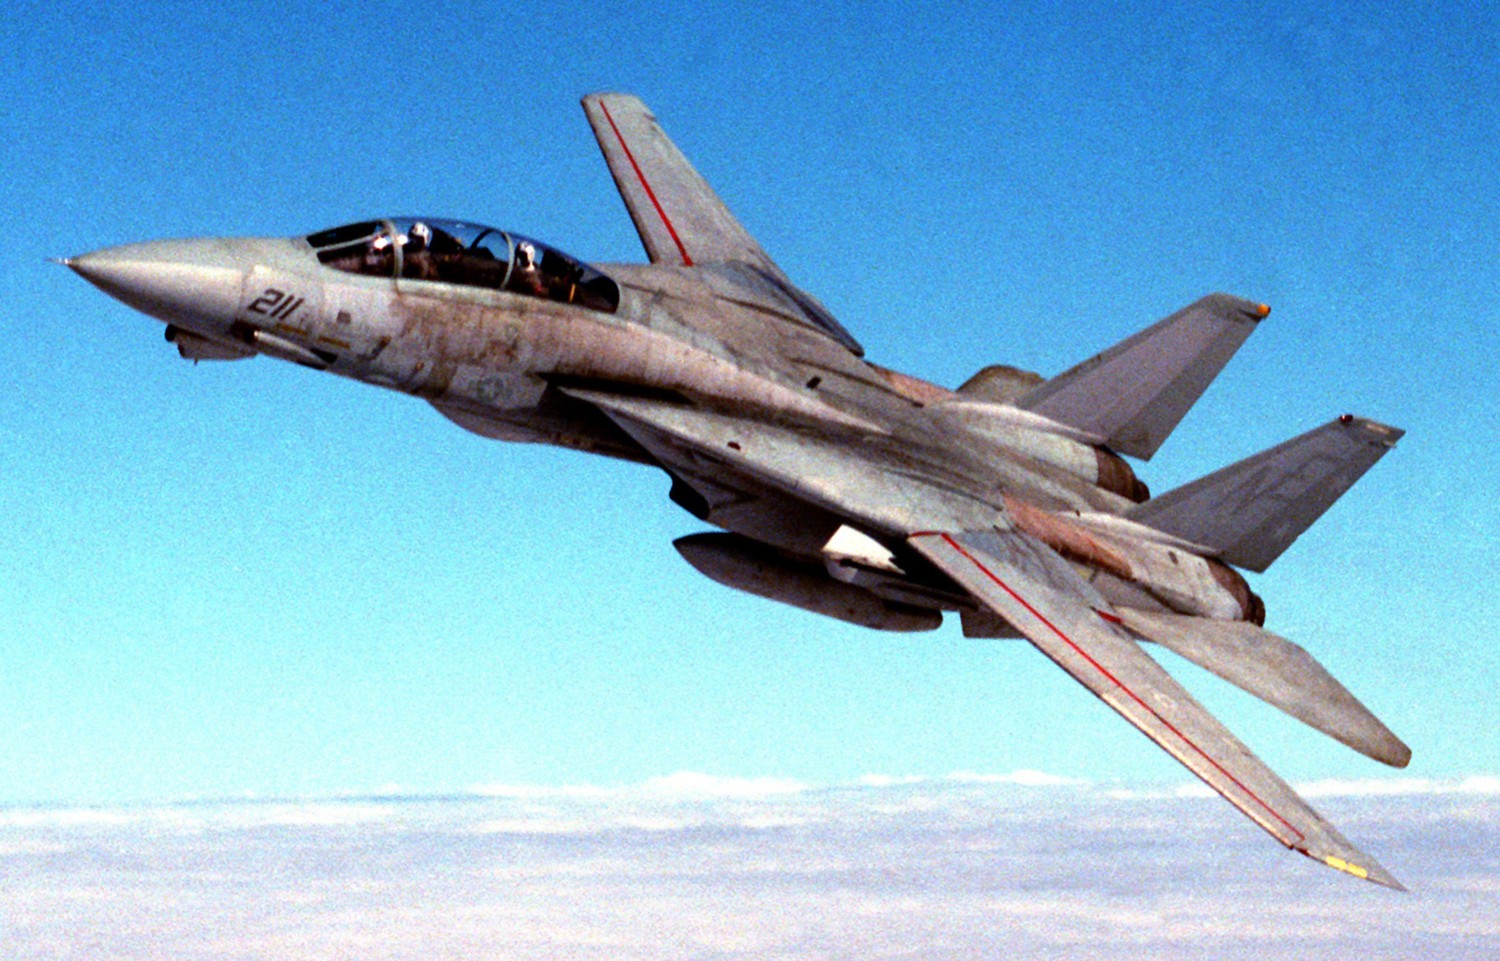 vf-2 bounty hunters fighter squadron fitron f-14a tomcat carrier air wing cvw-2 uss ranger cv-61 90